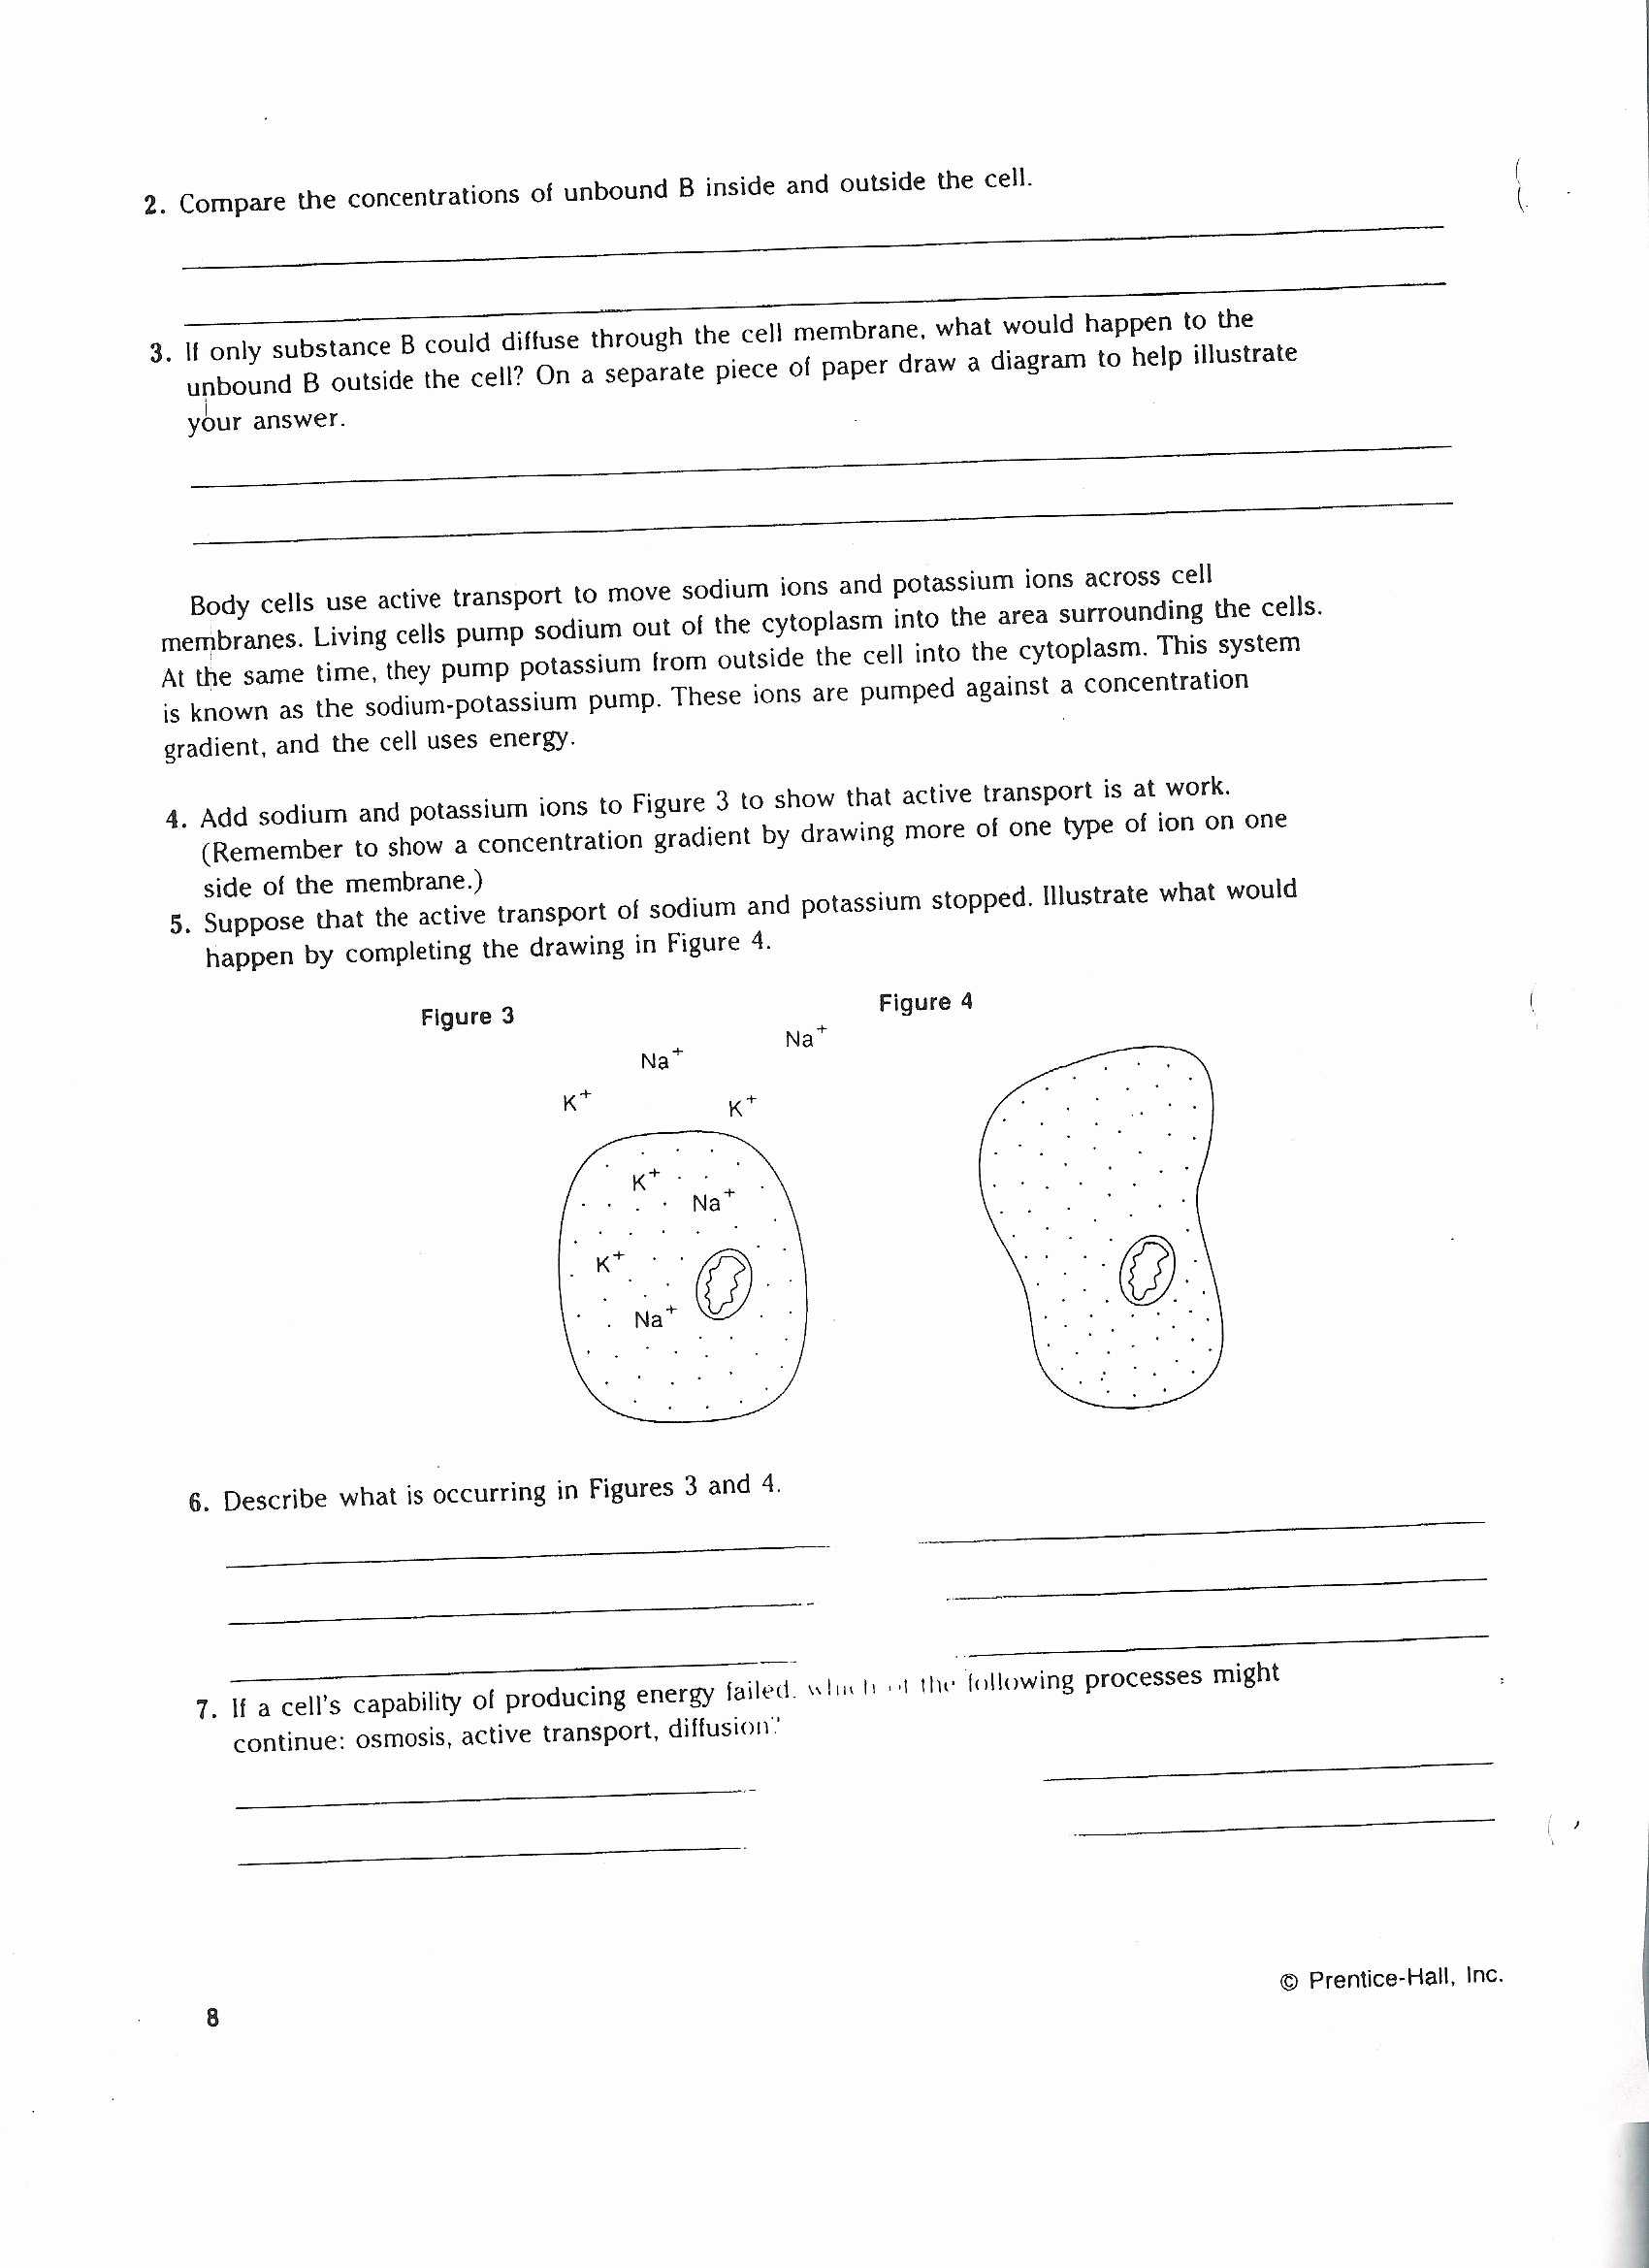 Cellular Transport Worksheet Section A Cell Membrane Structure Answer Key together with Cellular Transport and the Cell Cycle Worksheet Worksheet